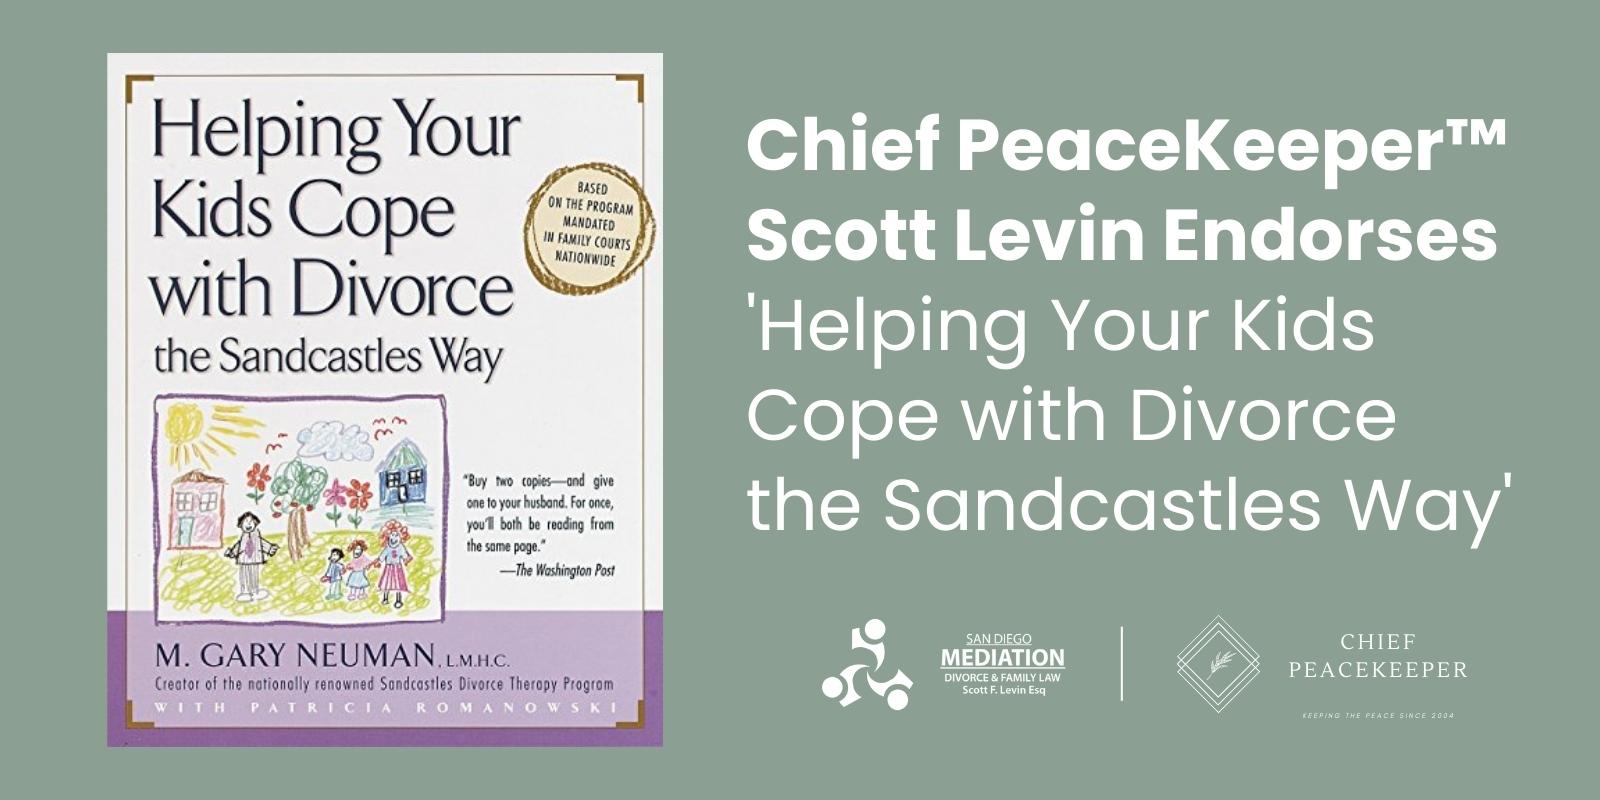 Chief PeaceKeeper™ Scott Levin Endorses 'Helping Your Kids Cope with Divorce the Sandcastles Way'